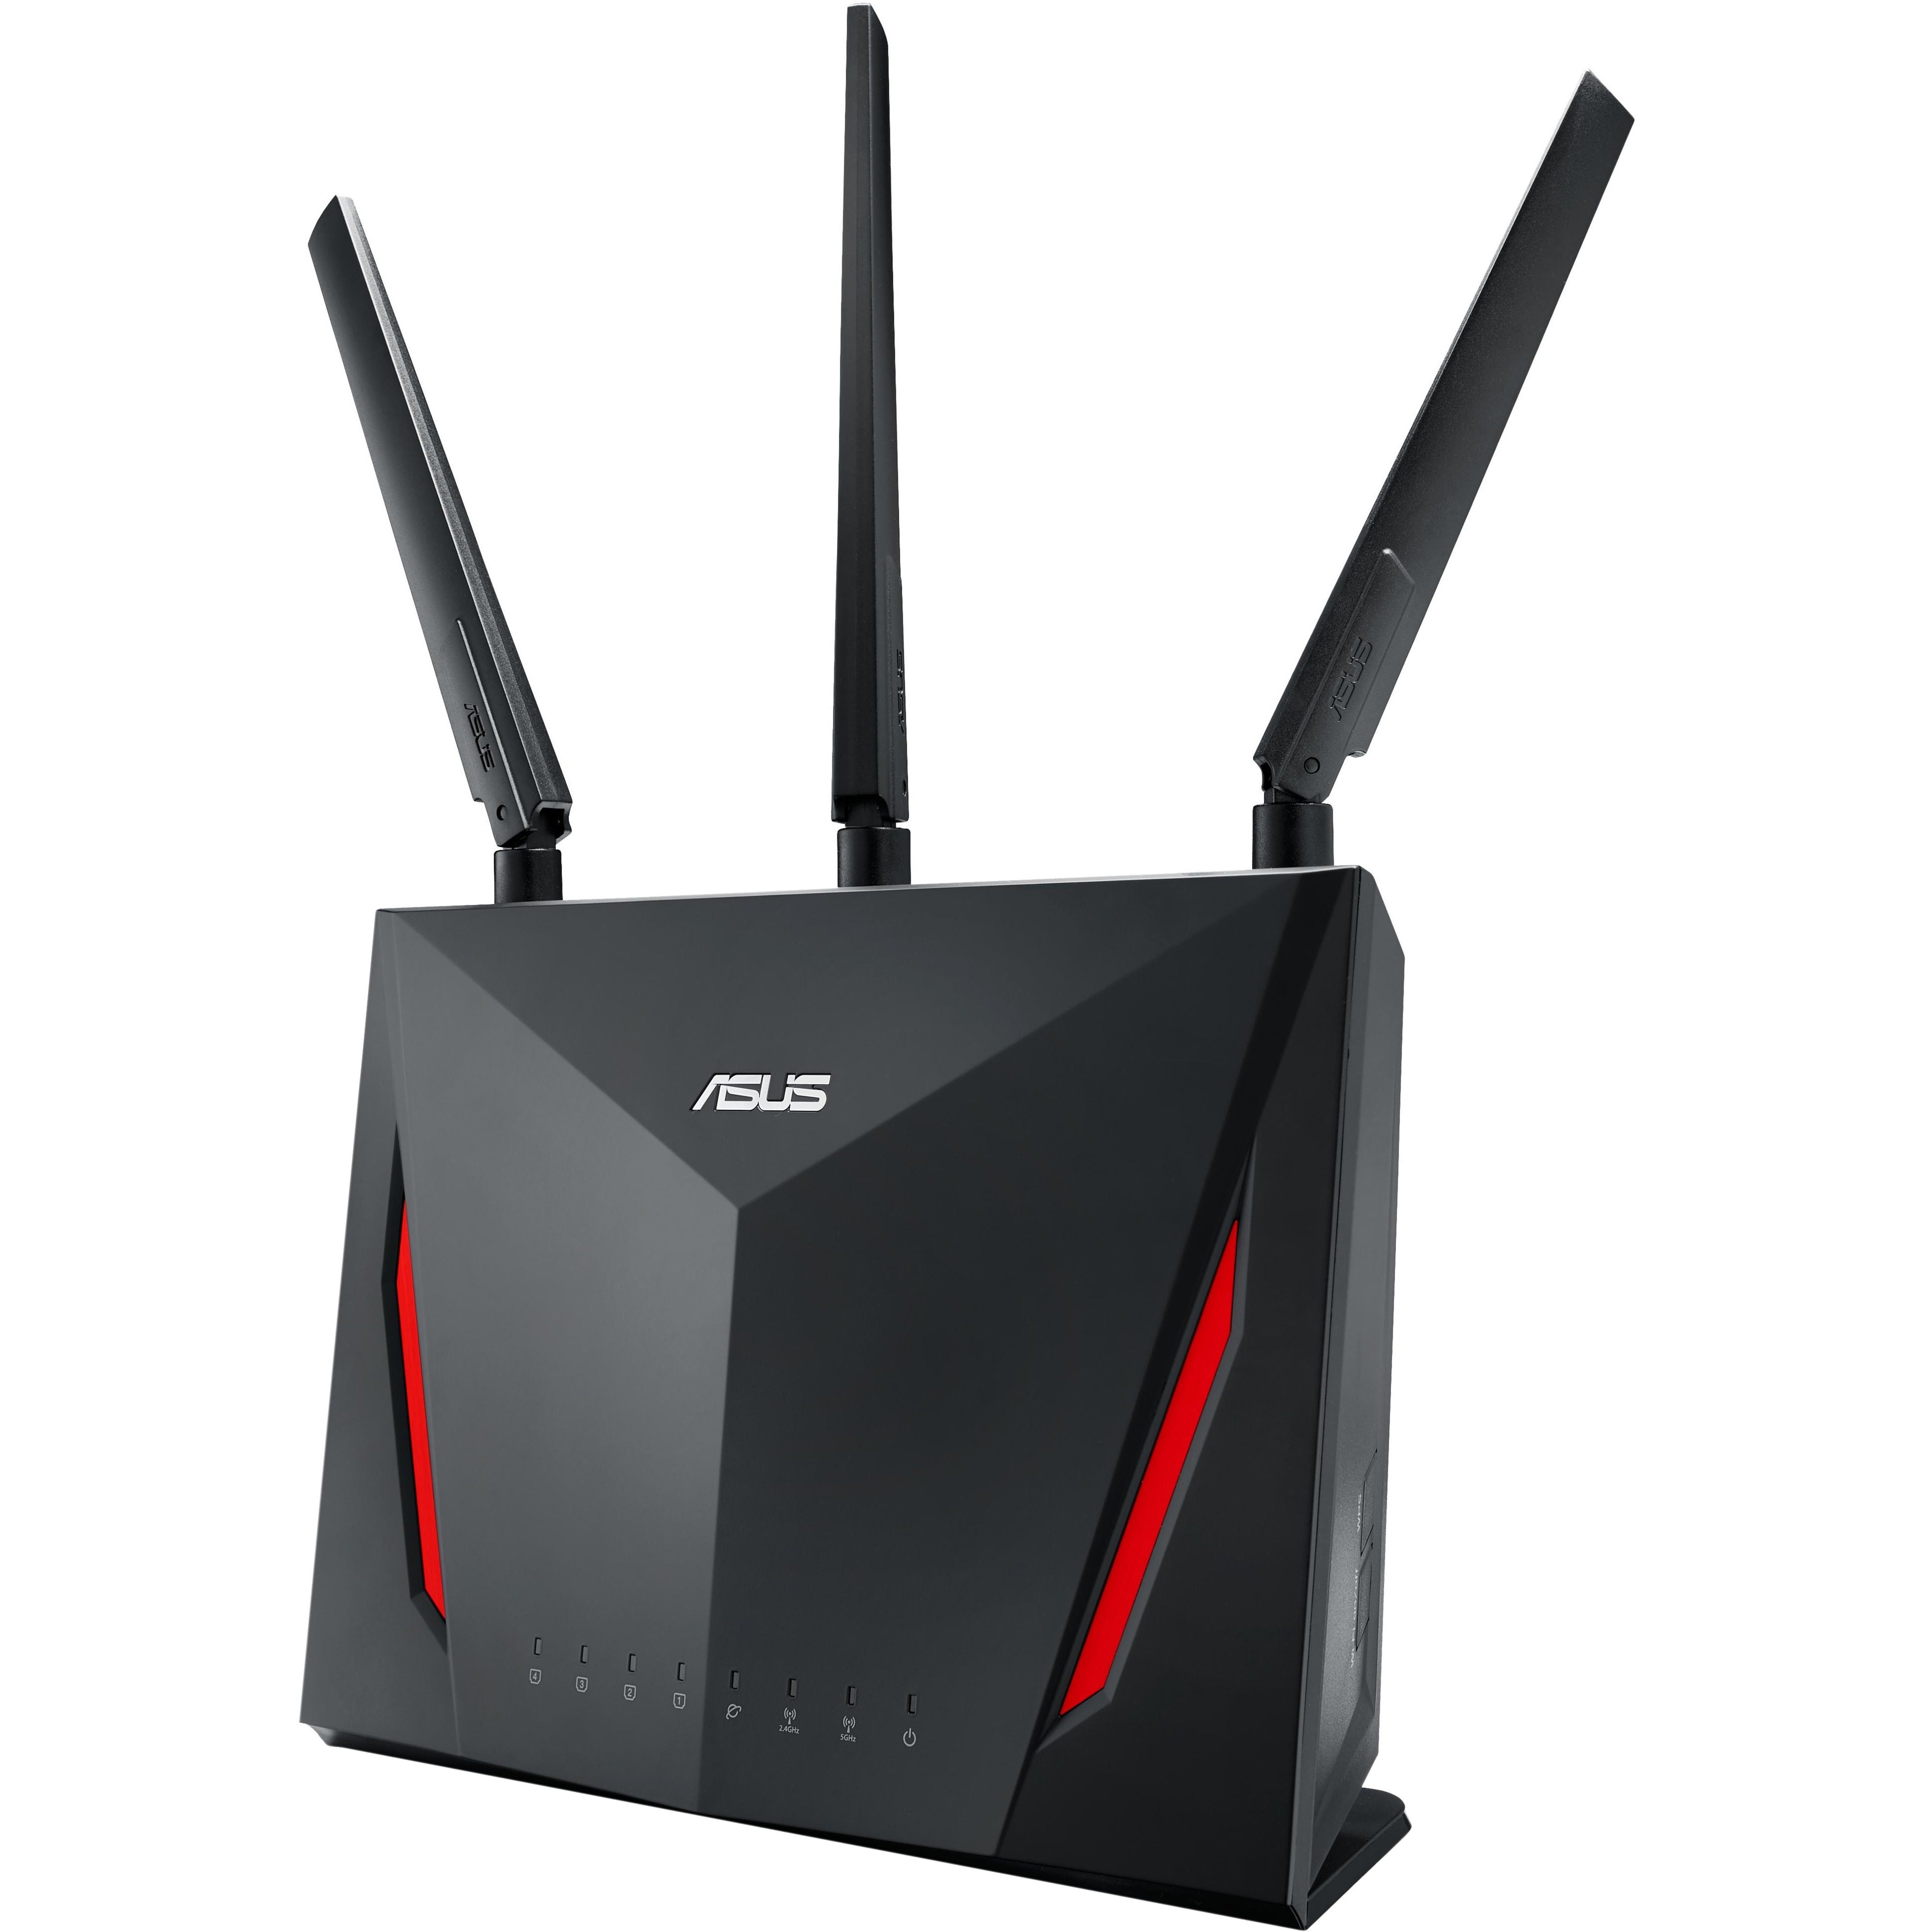 Asus RT-AC86U AirMesh Wi-Fi 5 Wireless Router, Gigabit Ethernet, VPN Supported